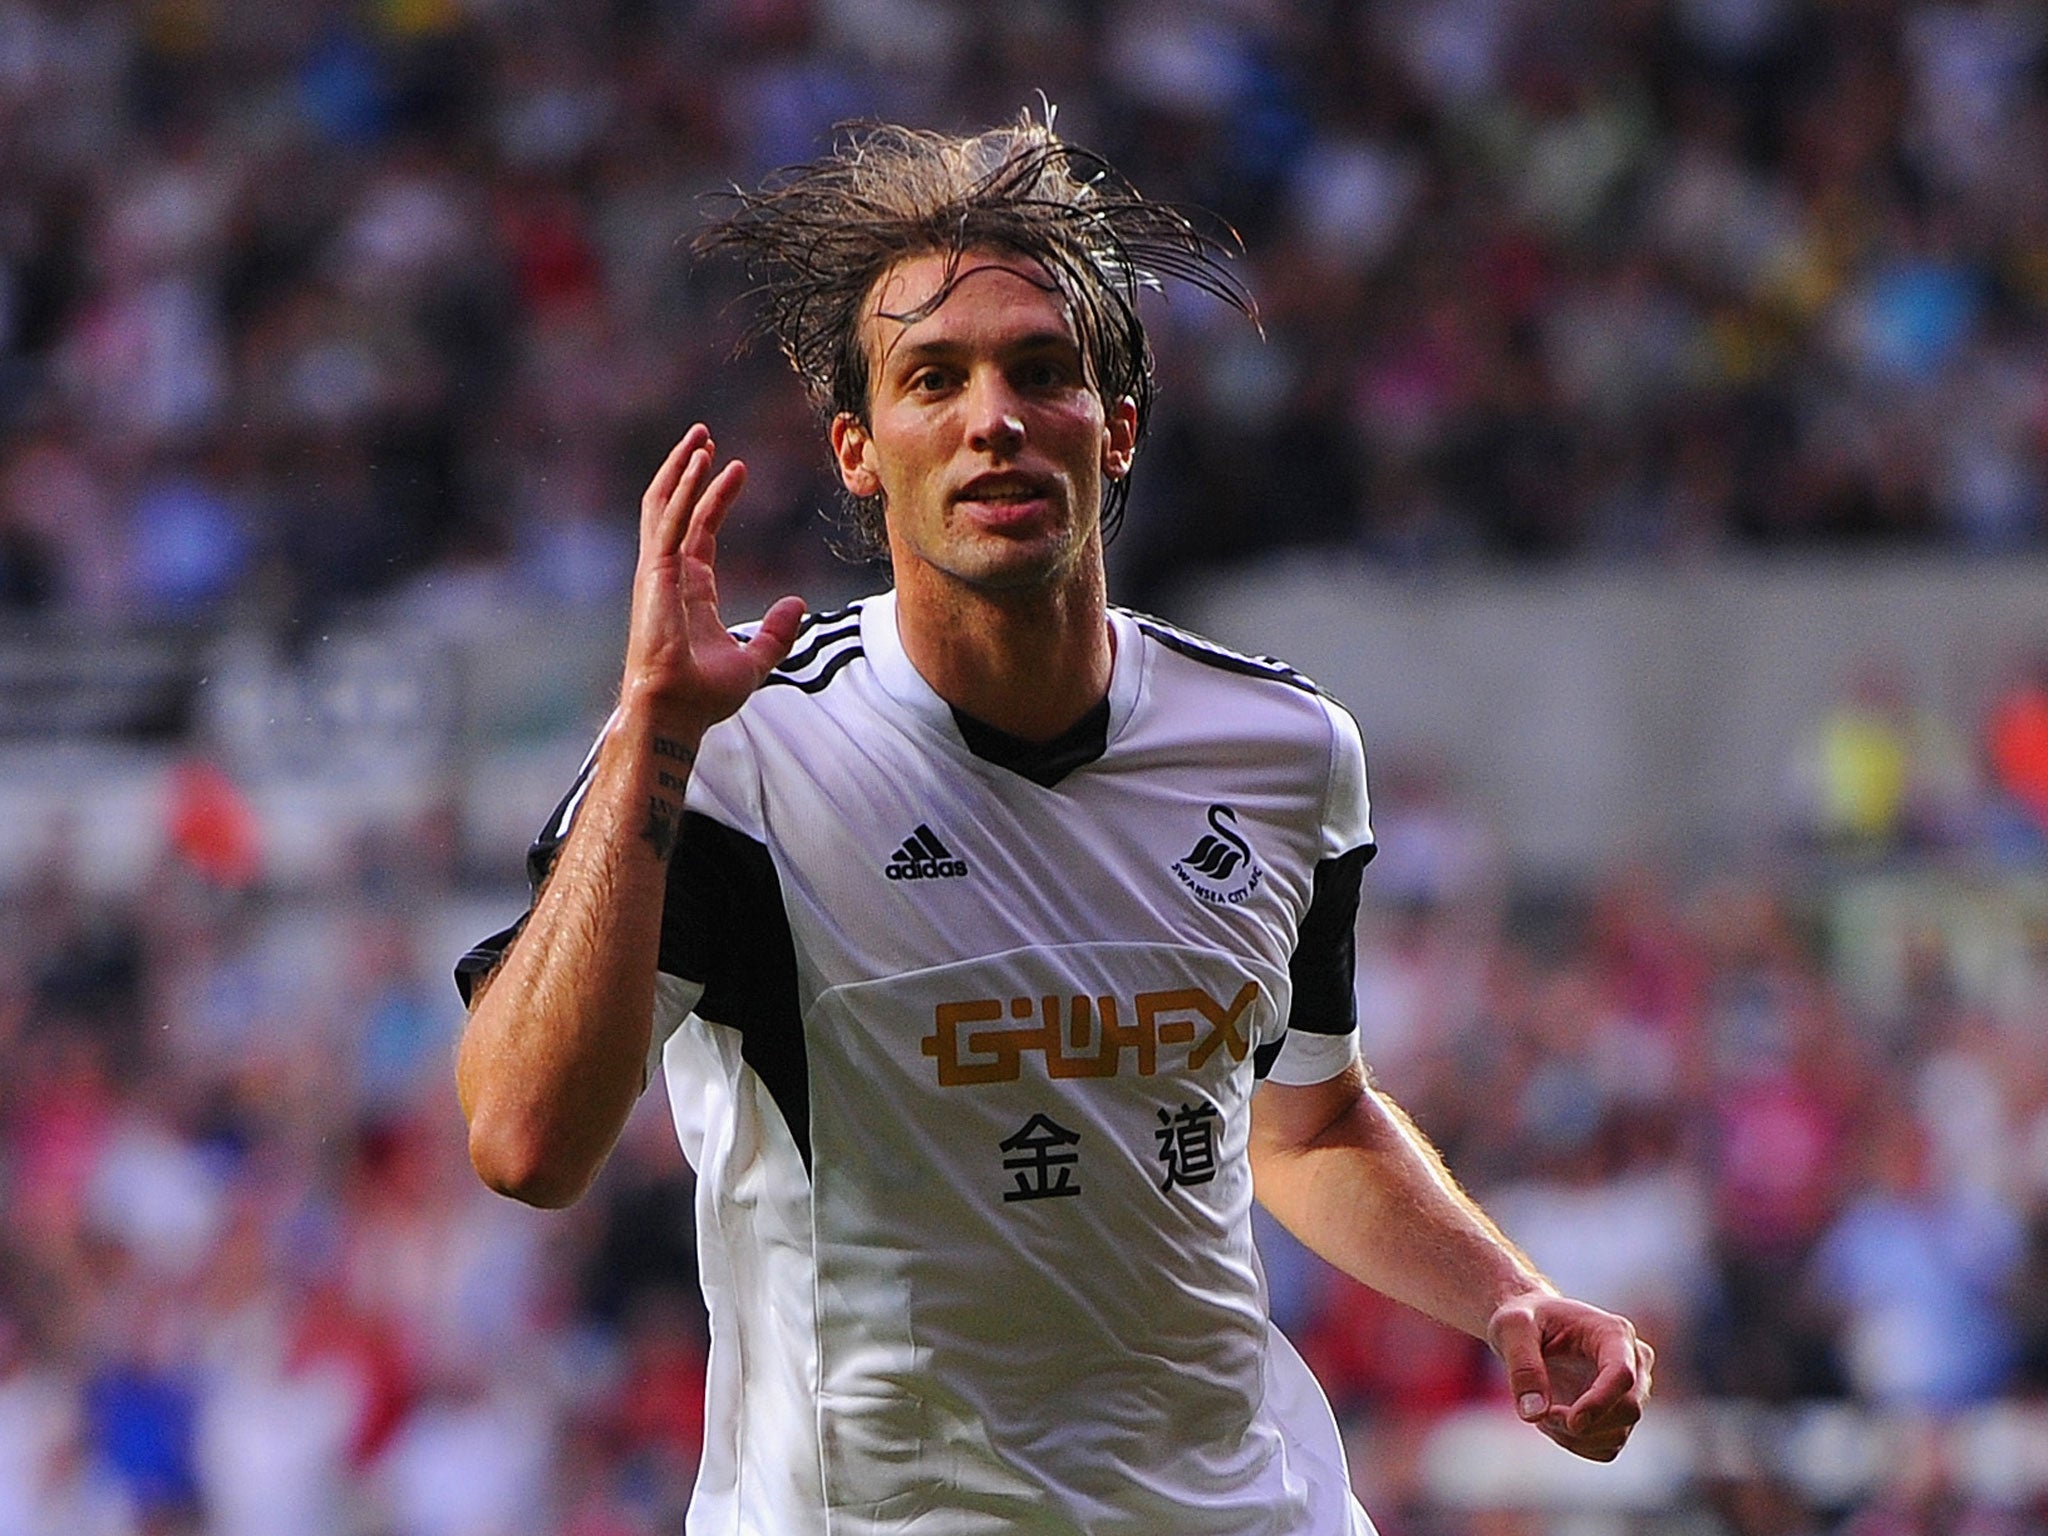 Arsenal will have to pay £25m for the services of Swansea's Michu